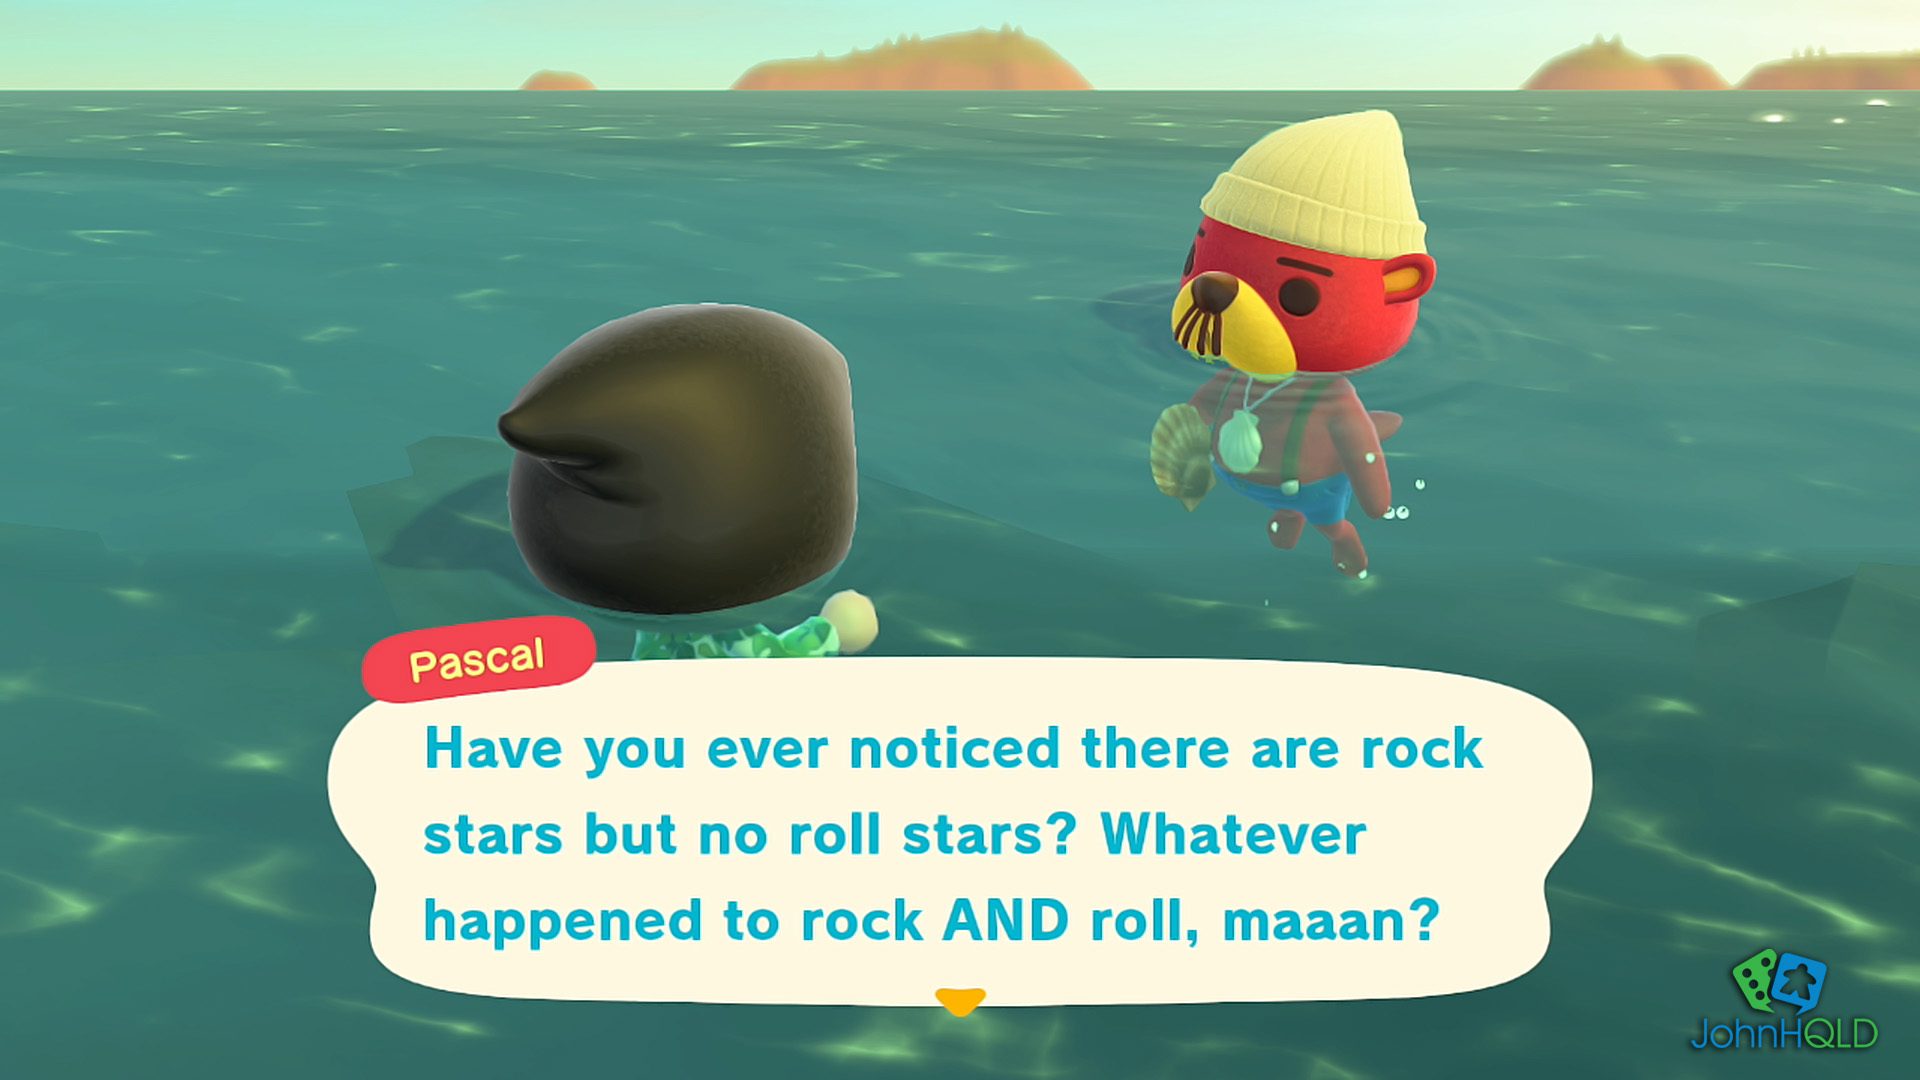 20220228 Animal Crossing New Horizons 2022022506531510 - Pascals Wisdom - Rock and Roll